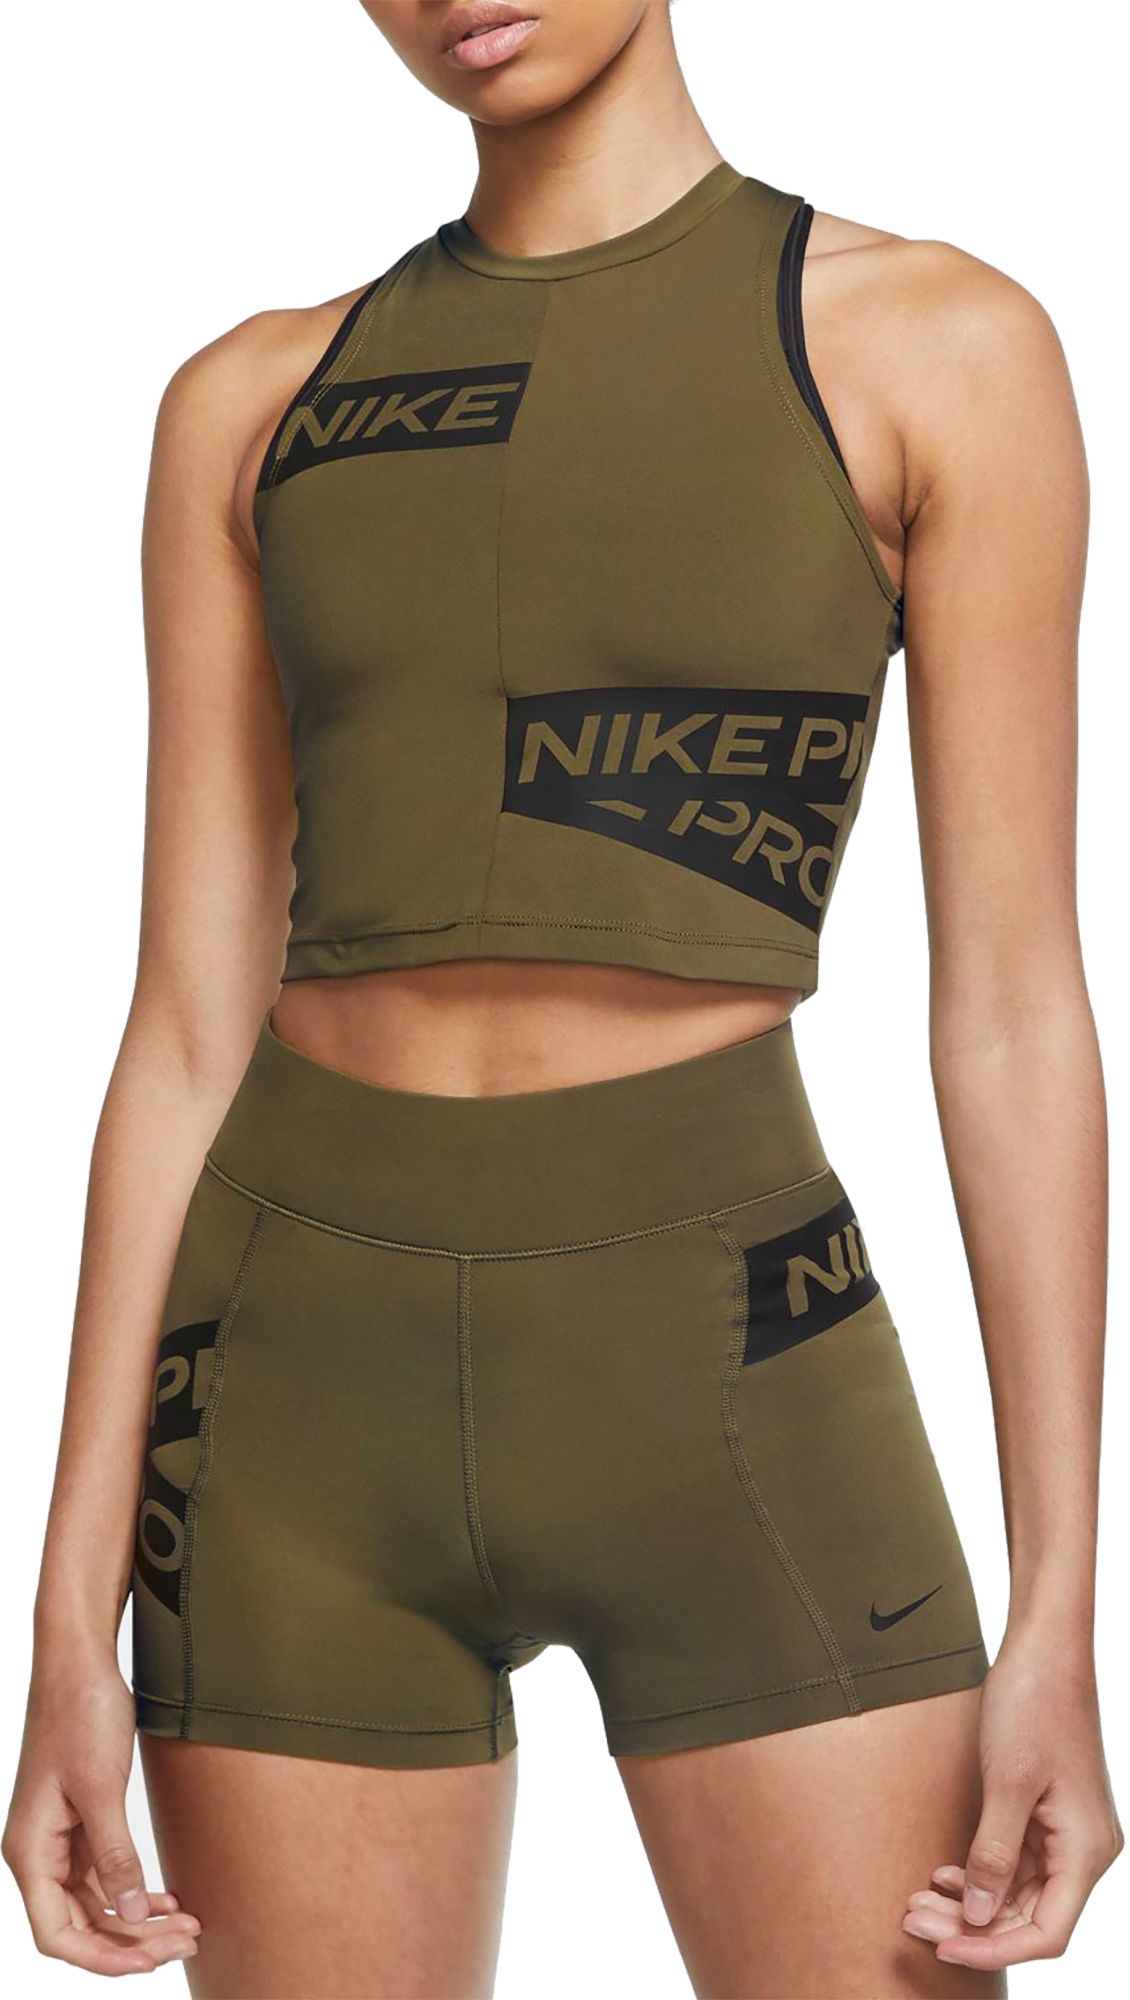 nike pro shorts and crop top set